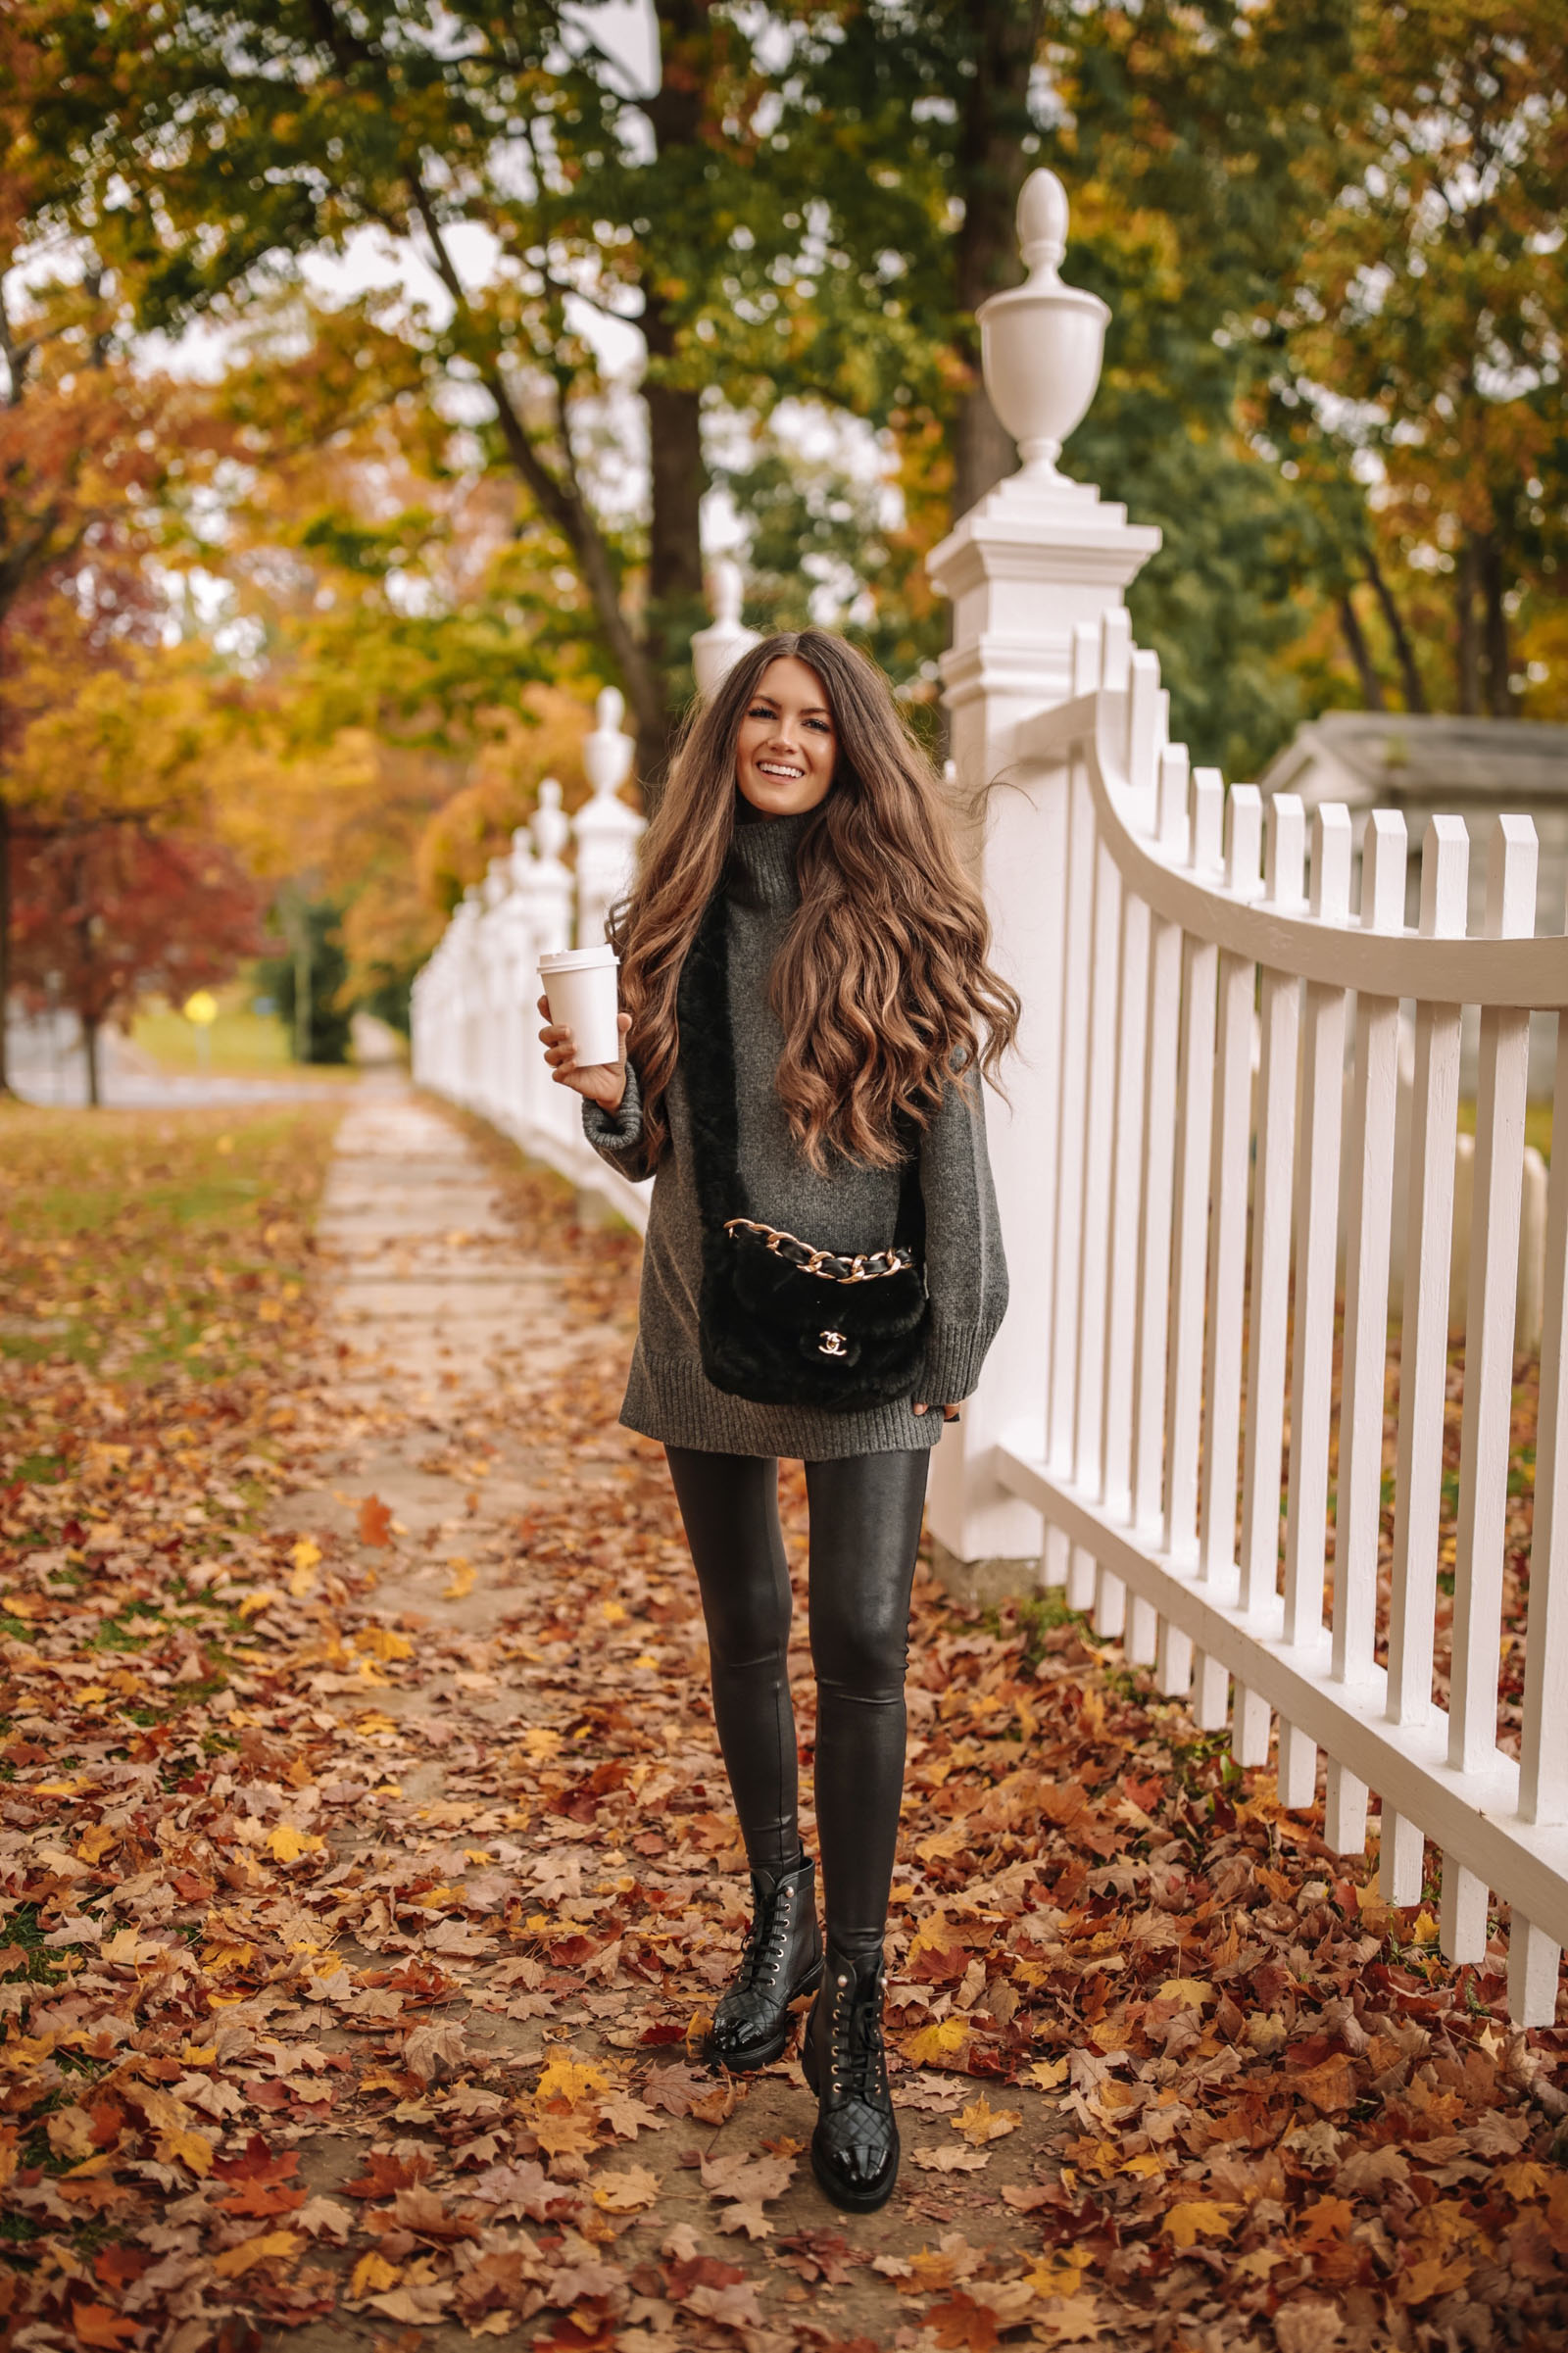 Grey Leggings with Boots Outfits (14 ideas & outfits)